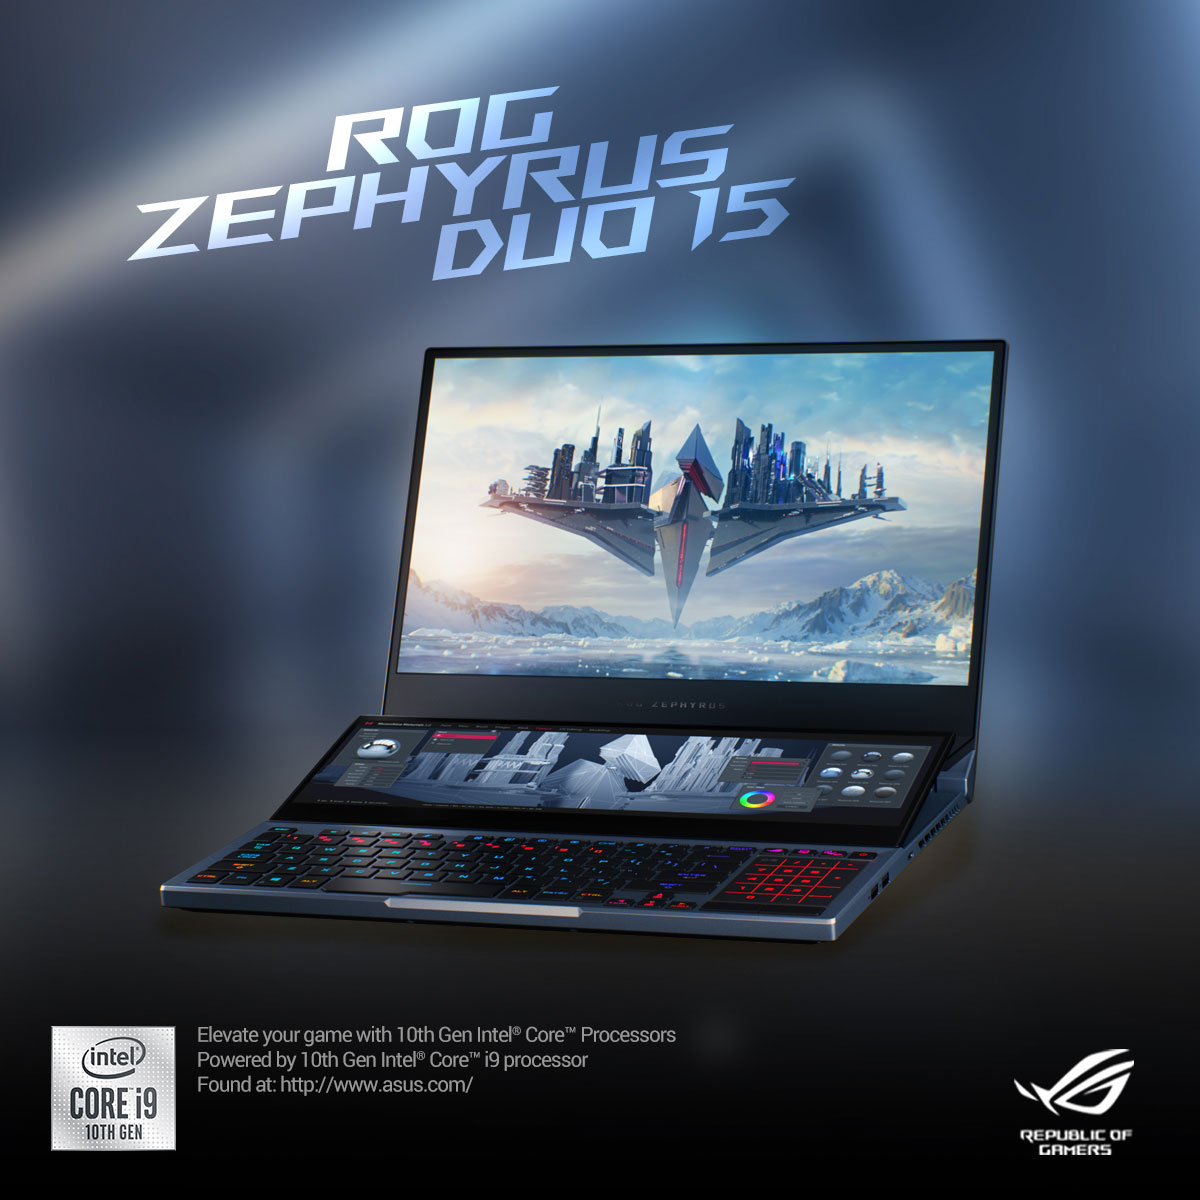 ASUS Updates ROG Laptop Lineup with the New Zephyrus Duo 15